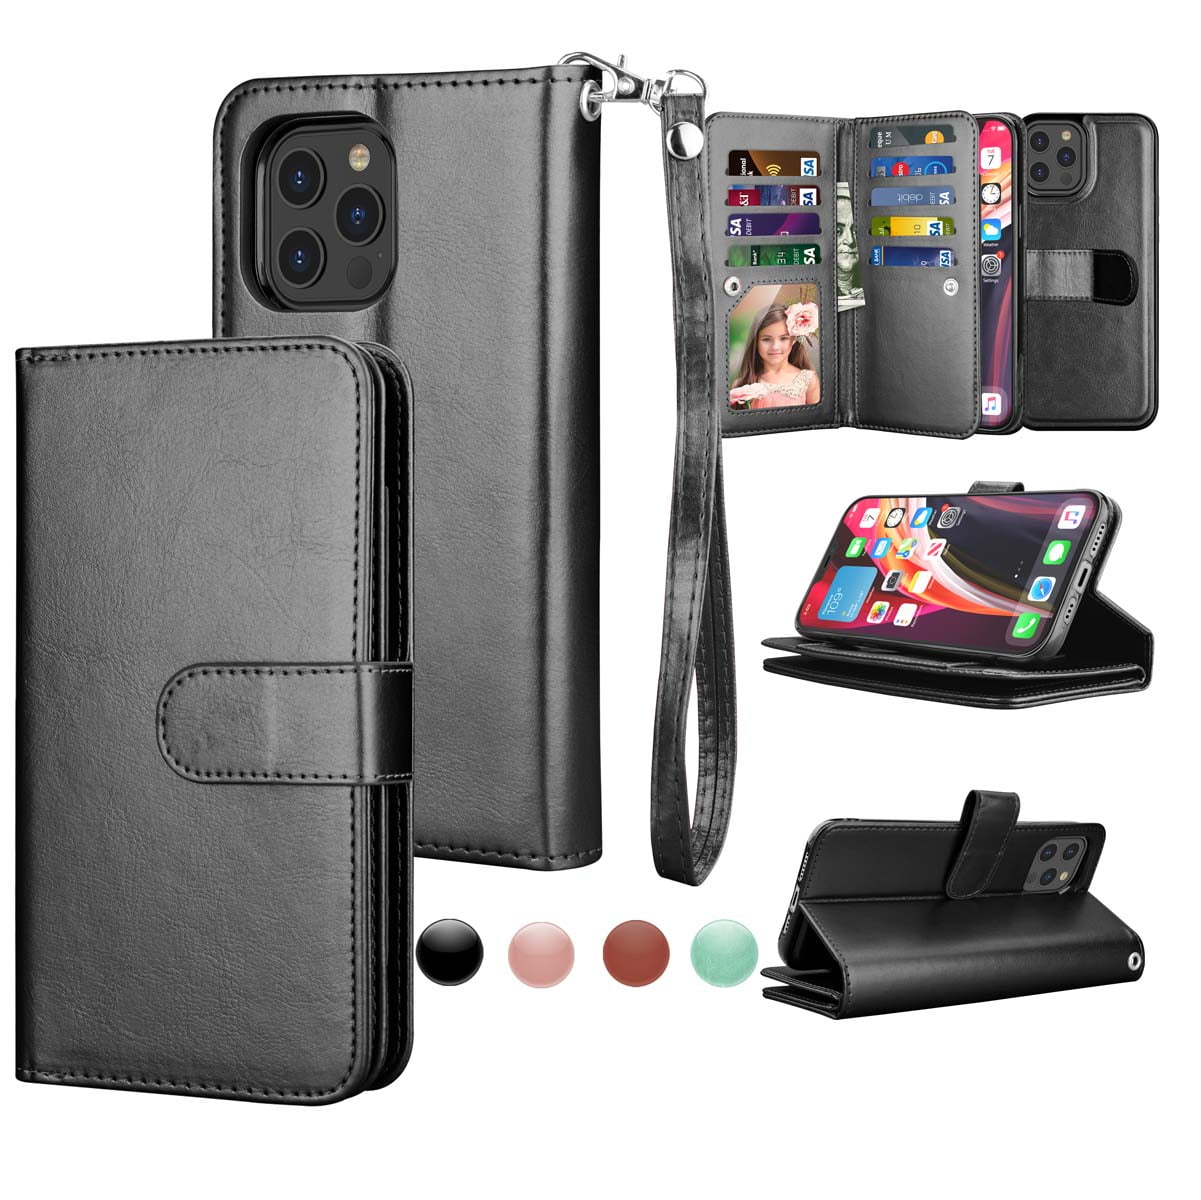 Flip Case for iPhone 11 Pro Max Compatible with iPhone 11 Pro Max black PU Leather Cover